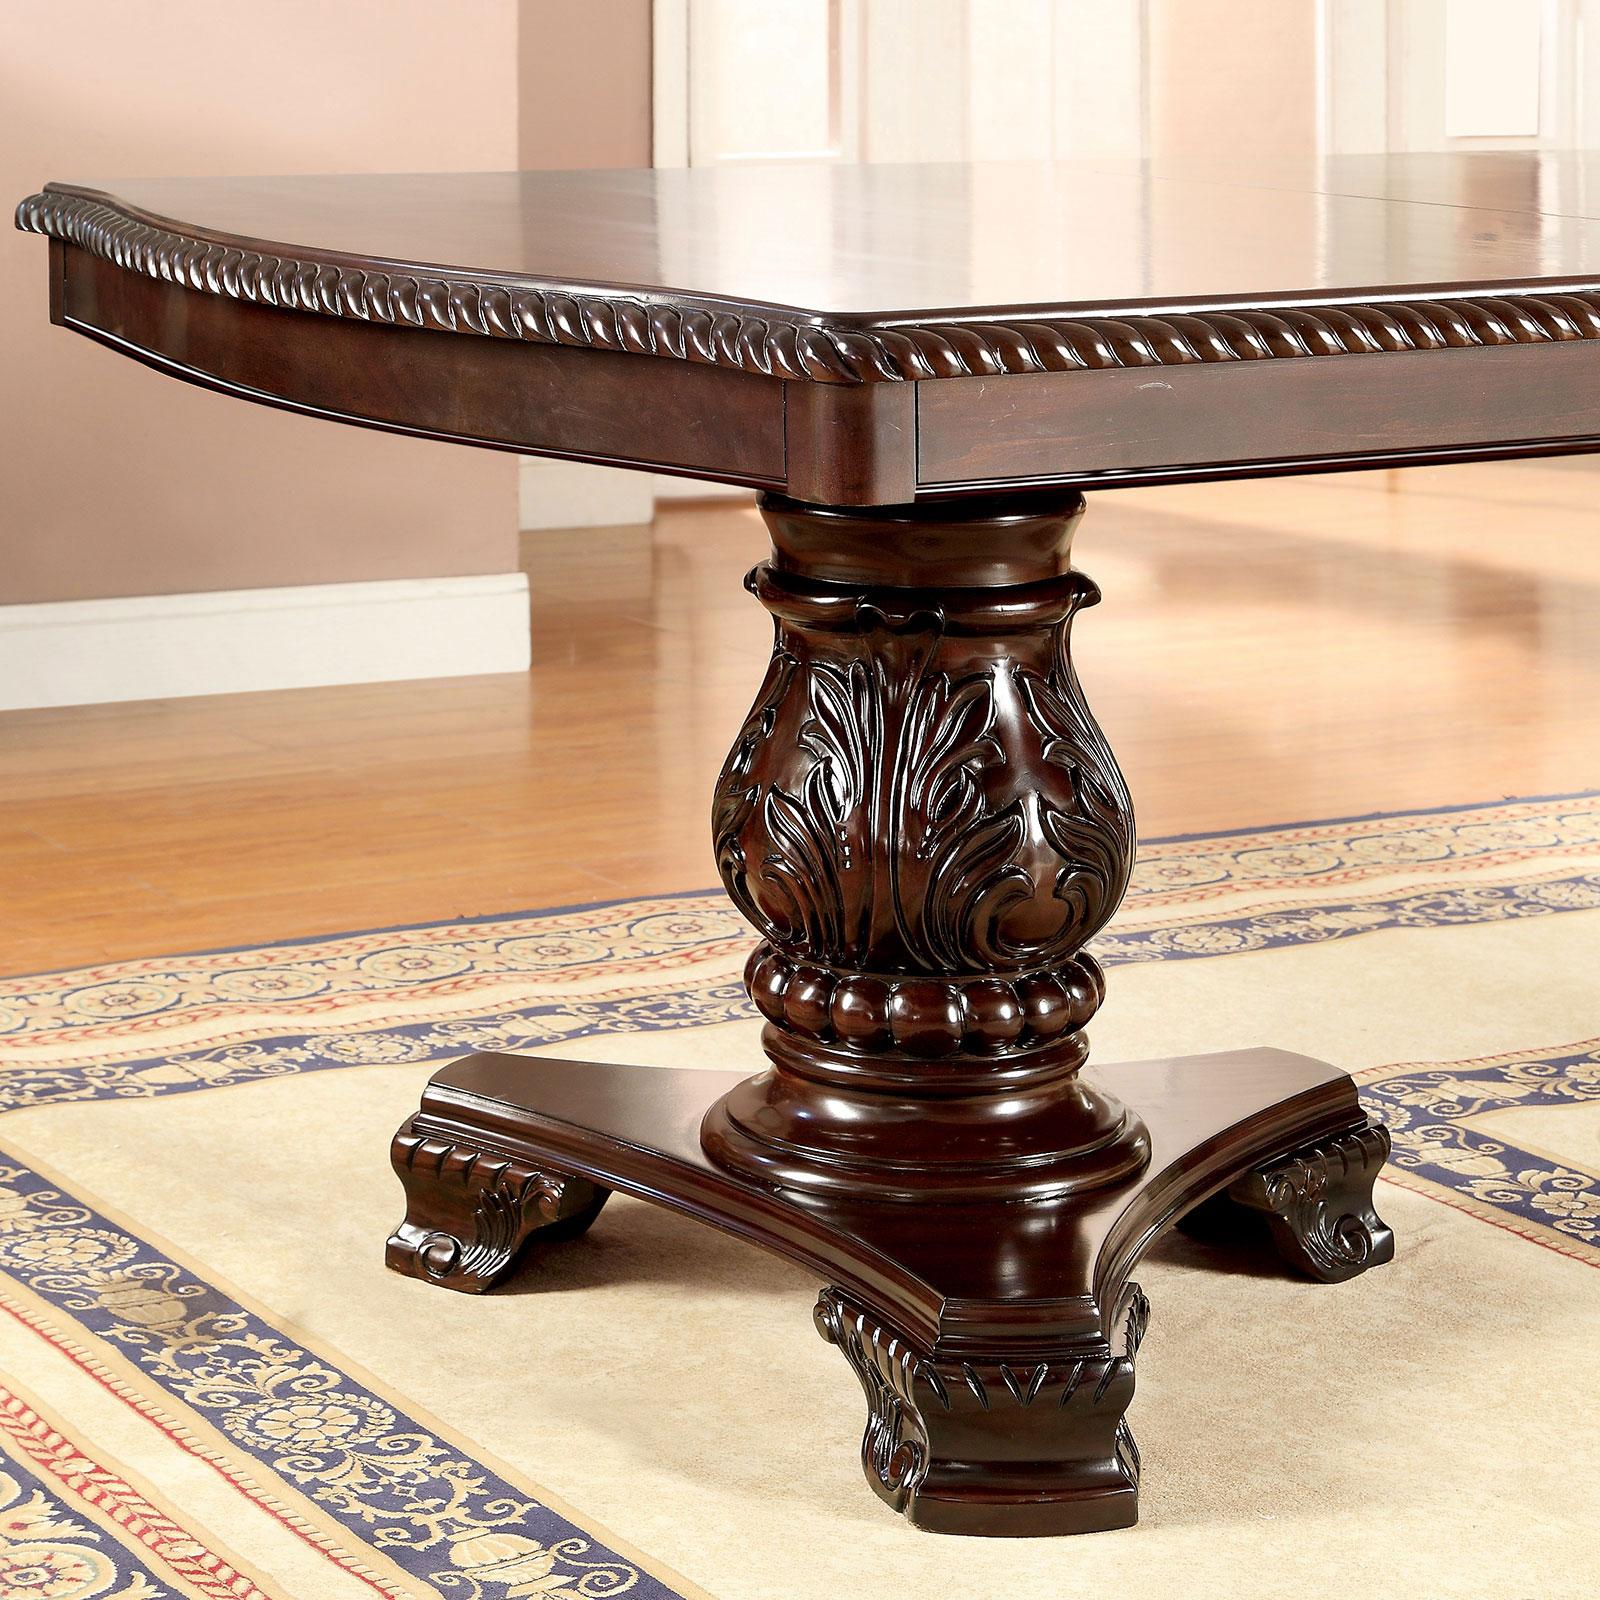 

    
Cherry Solid Wood Dining Table BELLAGIO CM3319T Furniture of America Traditional
